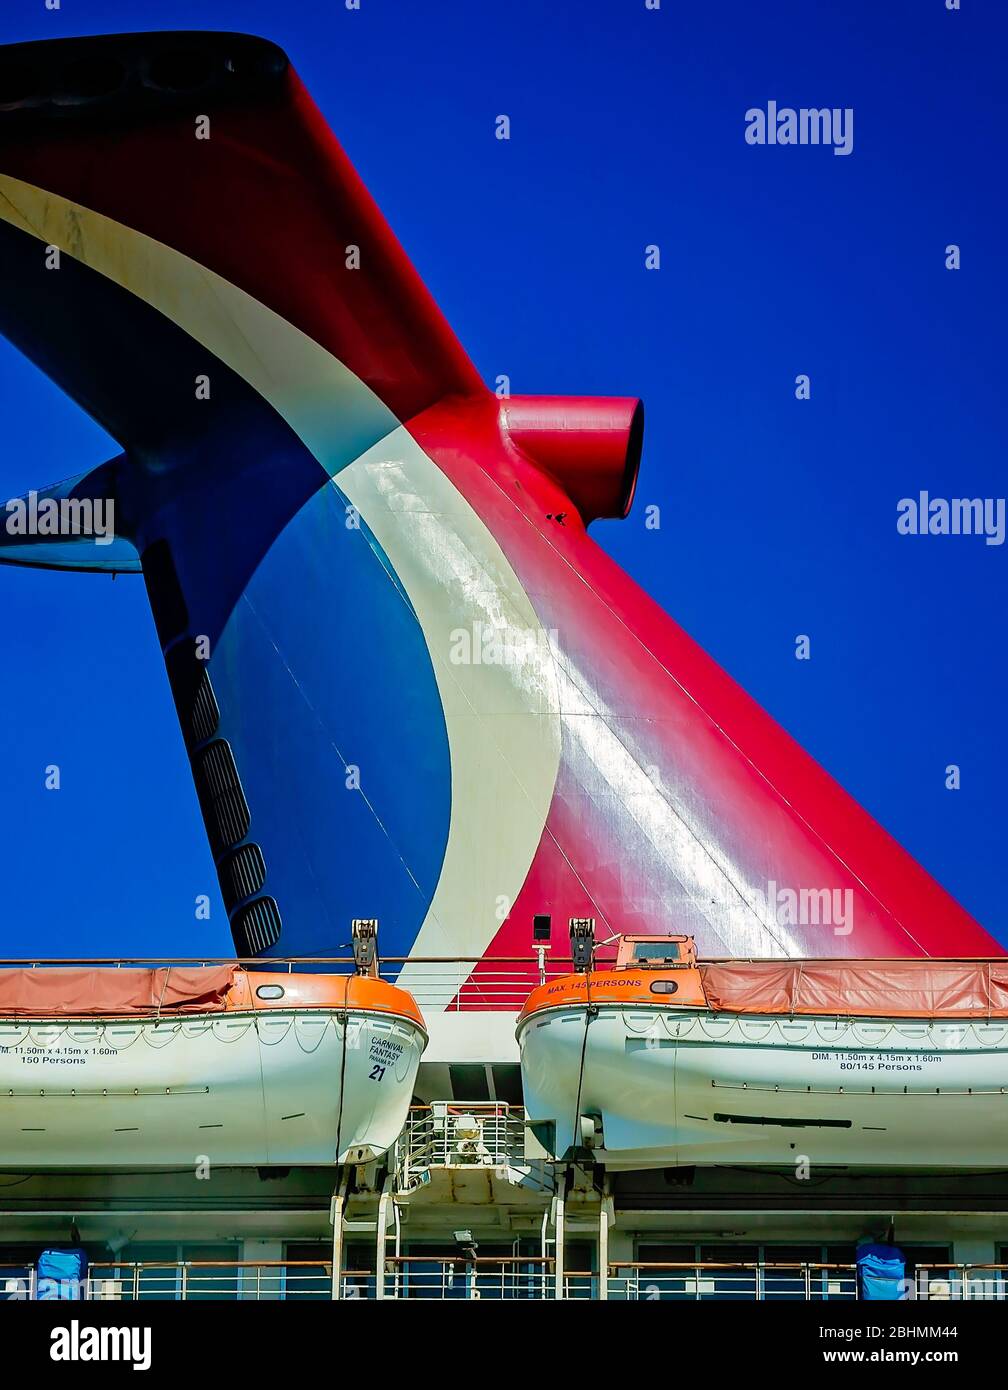 The Carnival Fantasy cruise ship’s whale tail funnel and lifeboats are pictured at the Alabama Cruise Terminal,  April 24, 2020, in Mobile, Alabama. Stock Photo